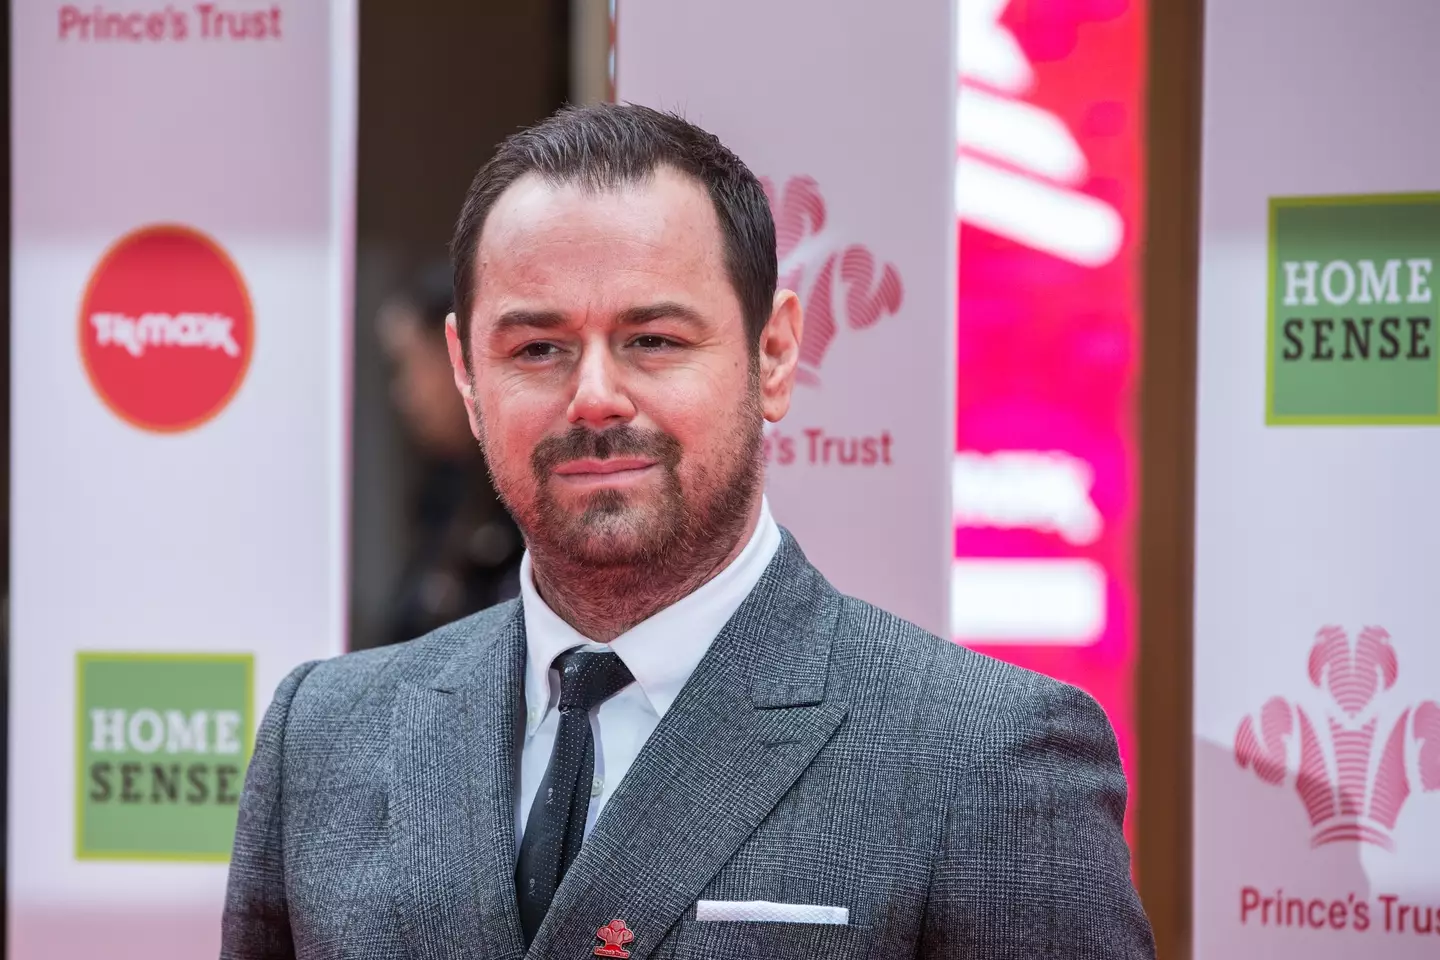 Former EastEnders star Danny Dyer revealed his wife cleared out their bank account after he was caught cheating.